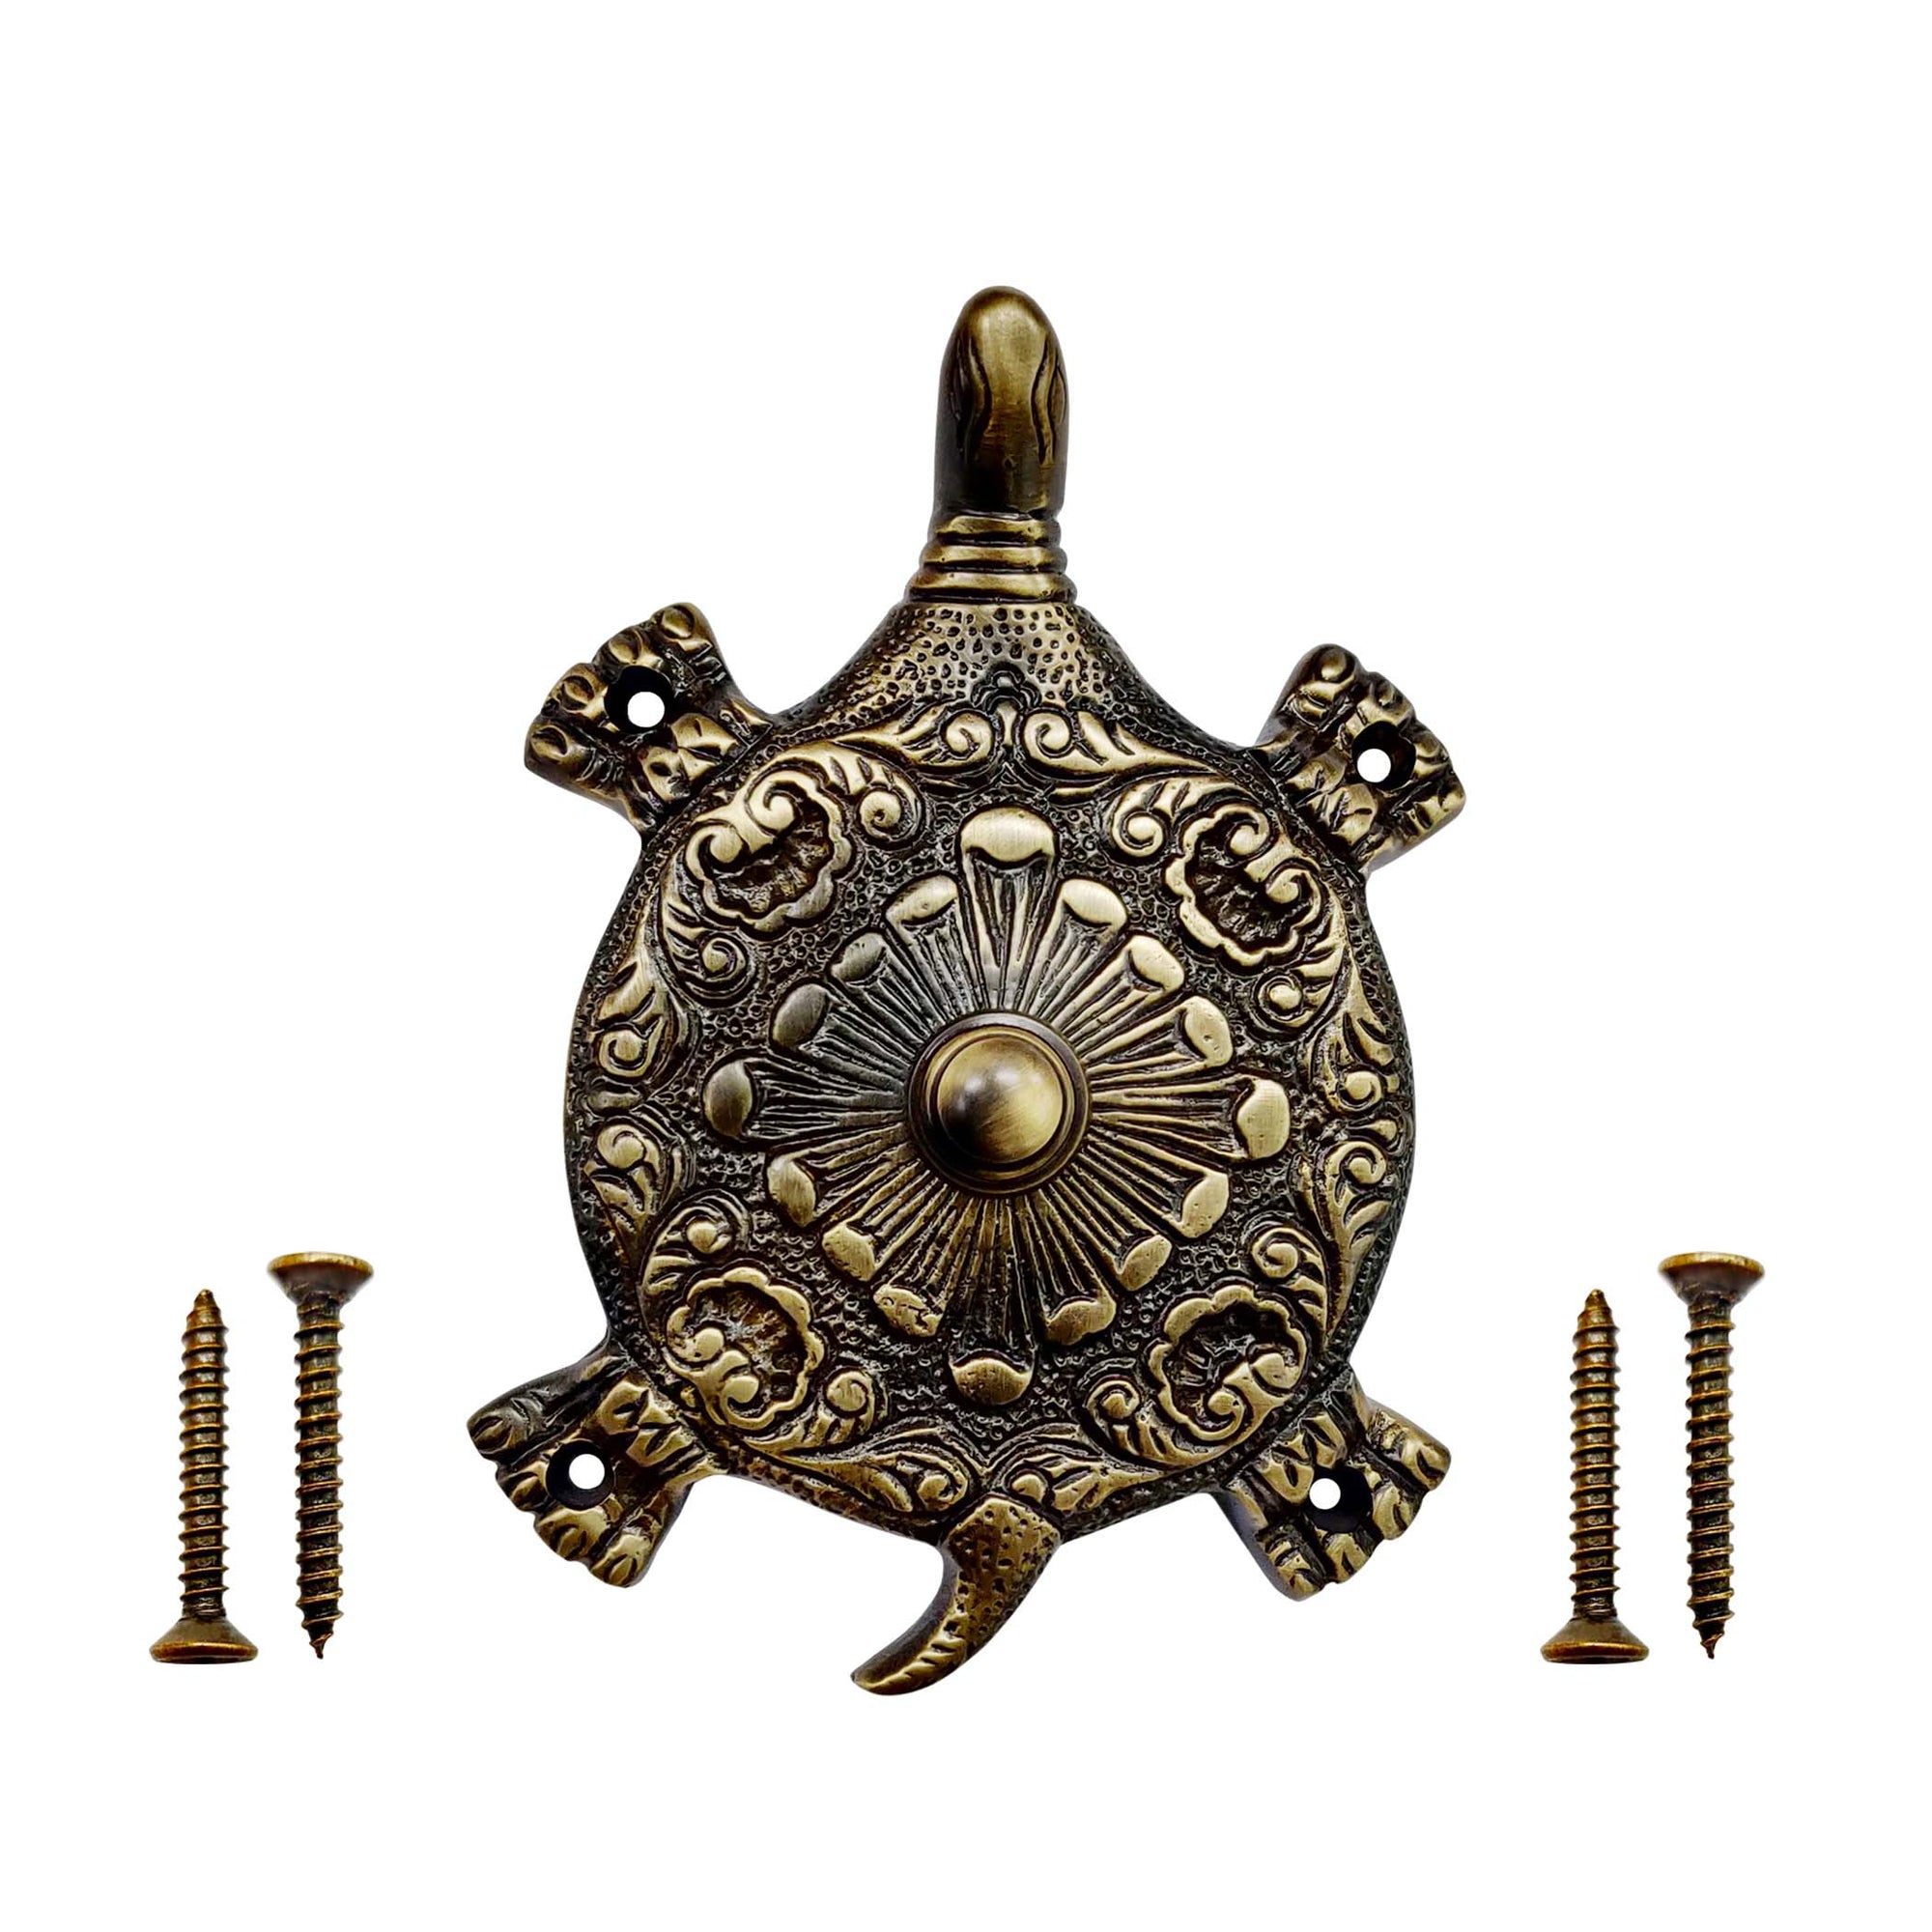 Decorative Doorbell Button – Finest Quality Bell Push Button – Easy to Install Calling Bell Button – Antique Brass